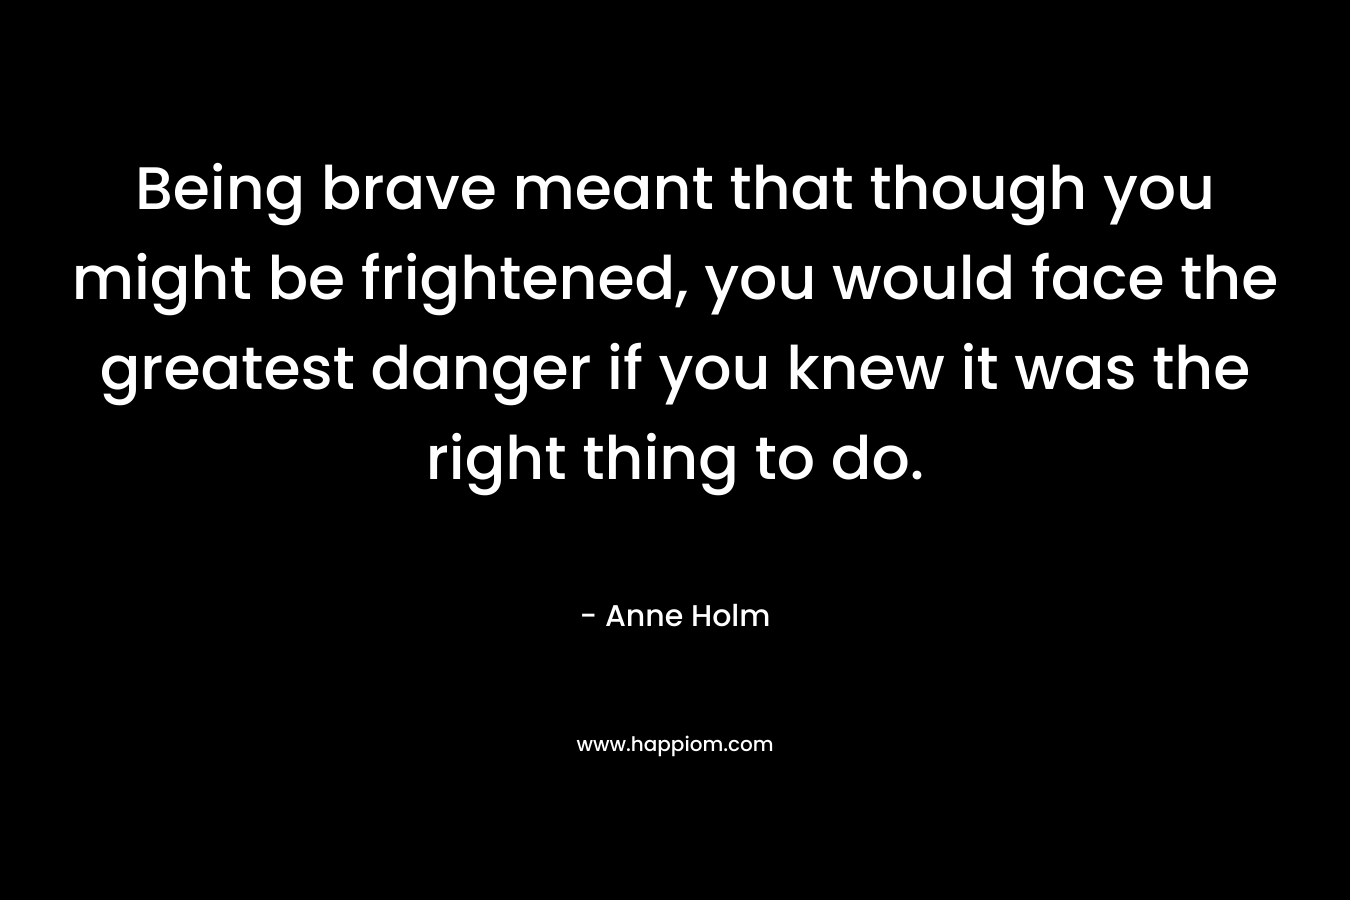 Being brave meant that though you might be frightened, you would face the greatest danger if you knew it was the right thing to do. – Anne Holm